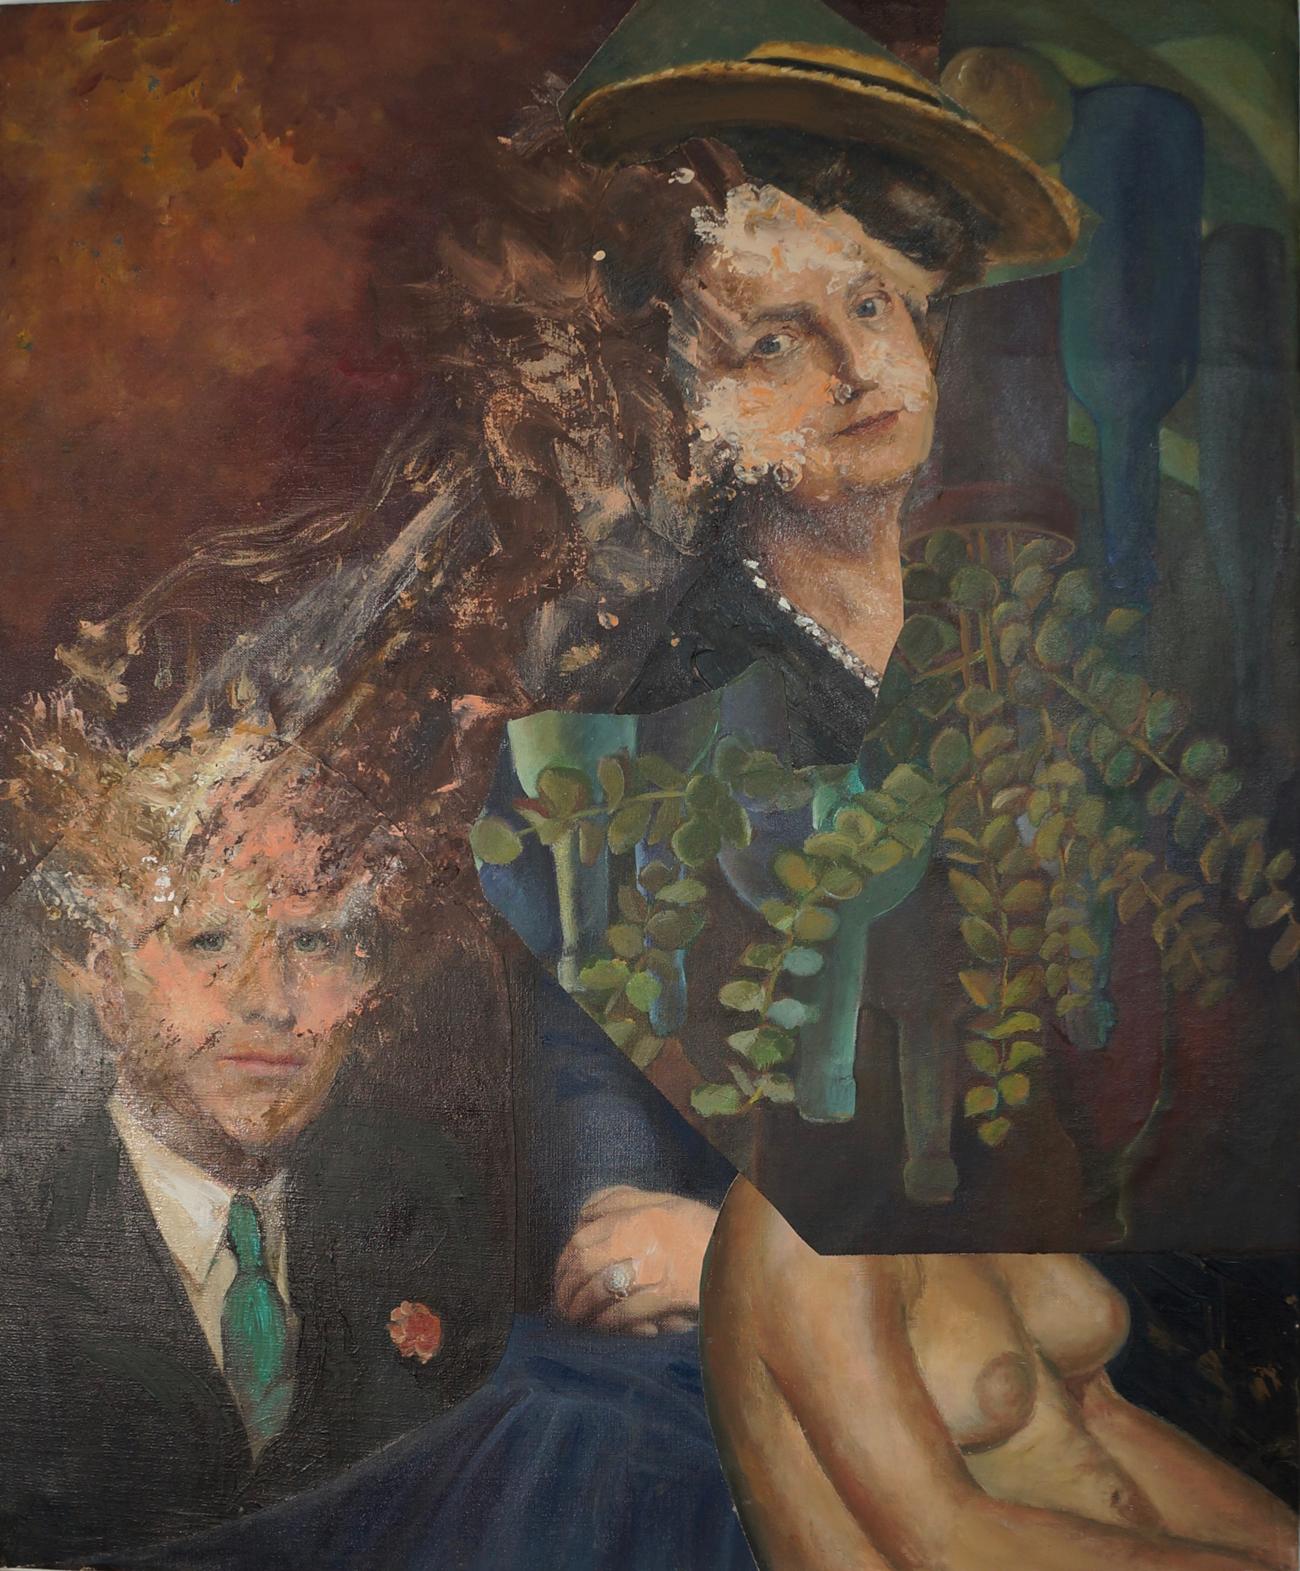 John Baker Figurative Painting - "My Neighbors Became Lovers: An Imaginary Double Portrait", mixed media, collage